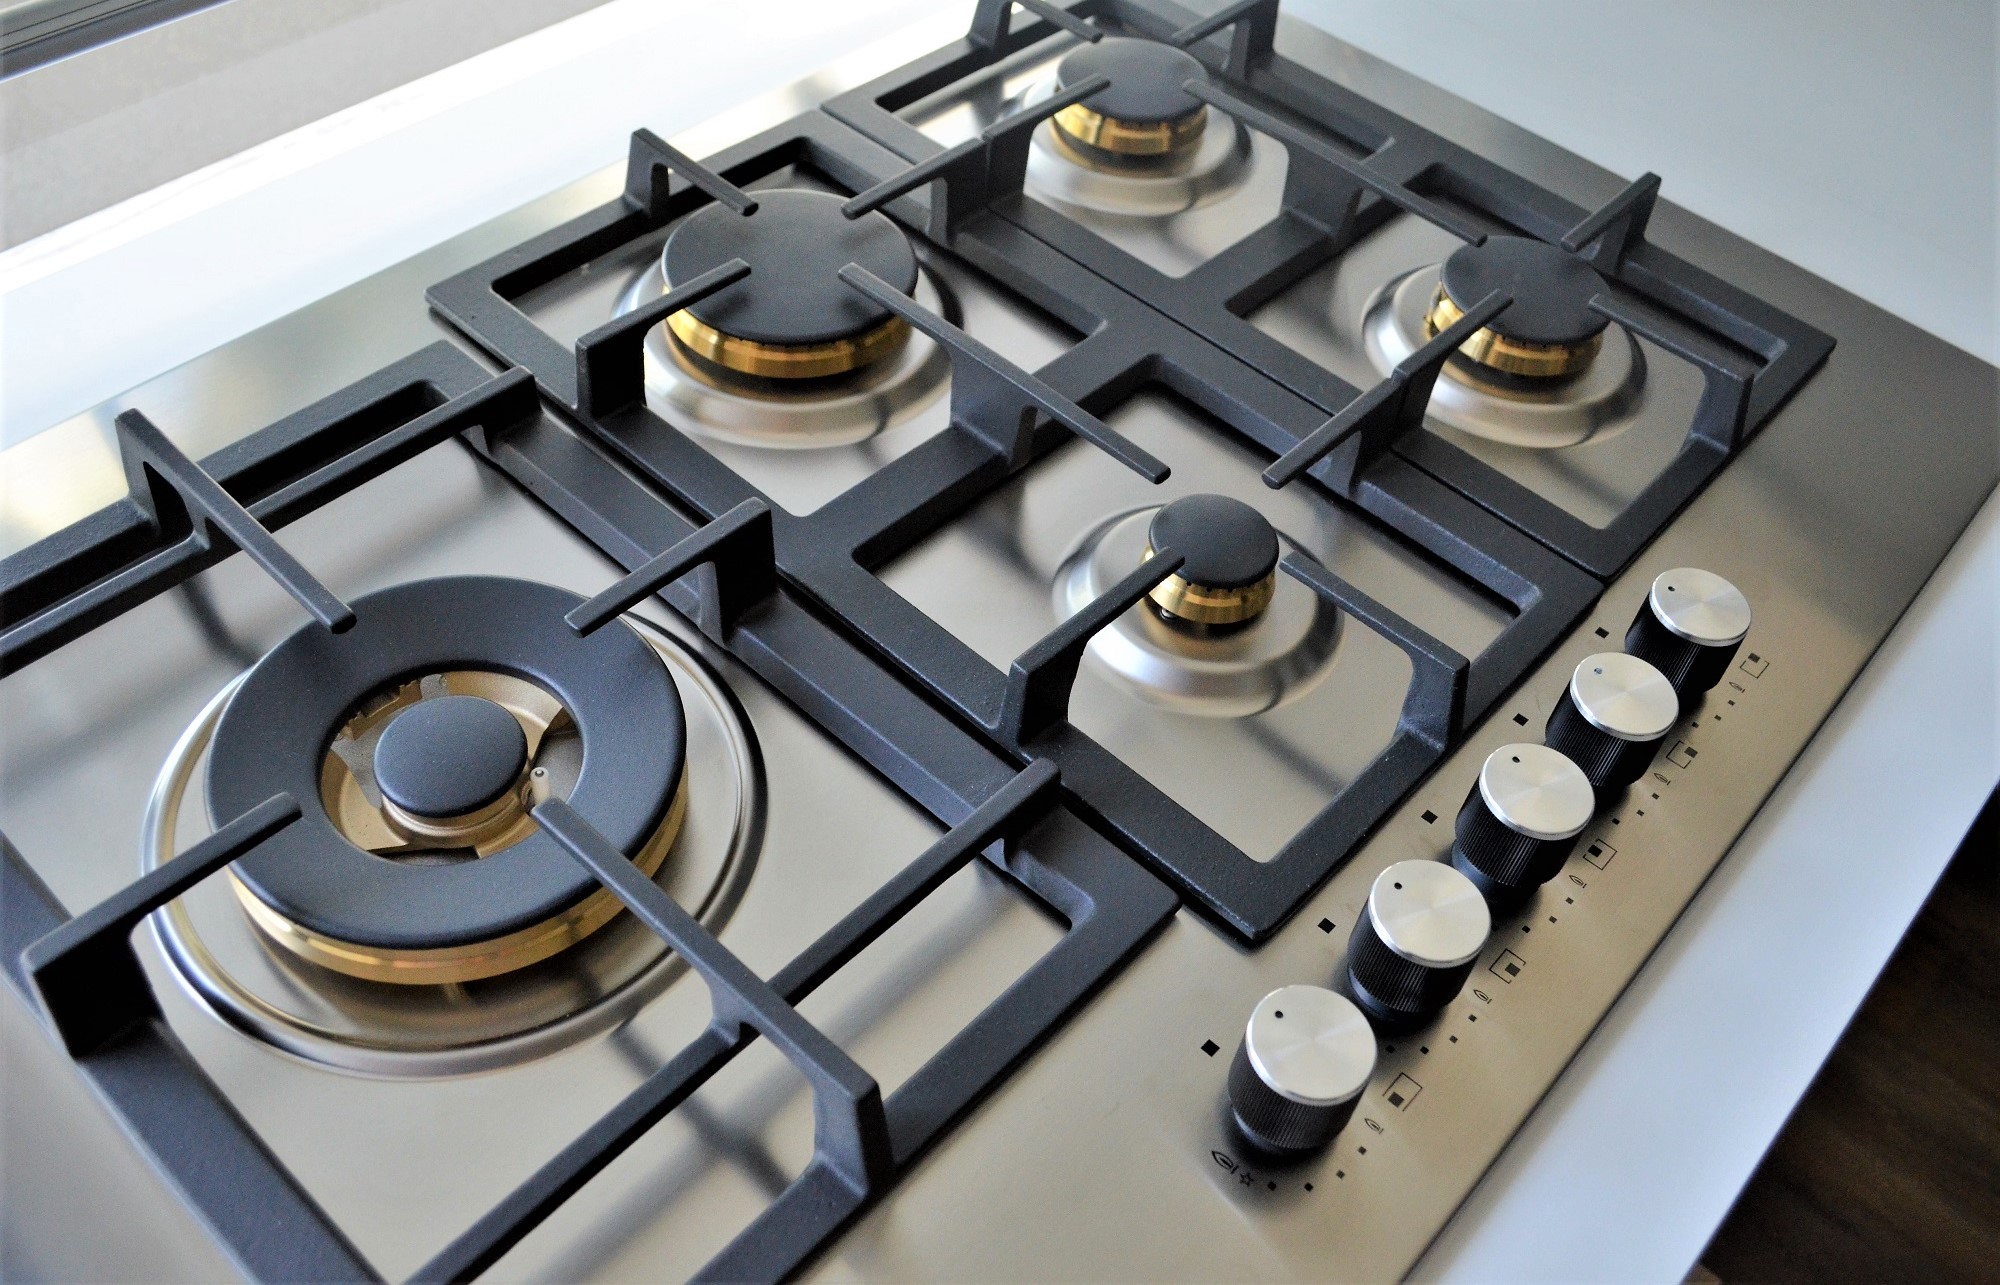 cooktop-elanto-professionale-75cm-lateral-performance.jpg